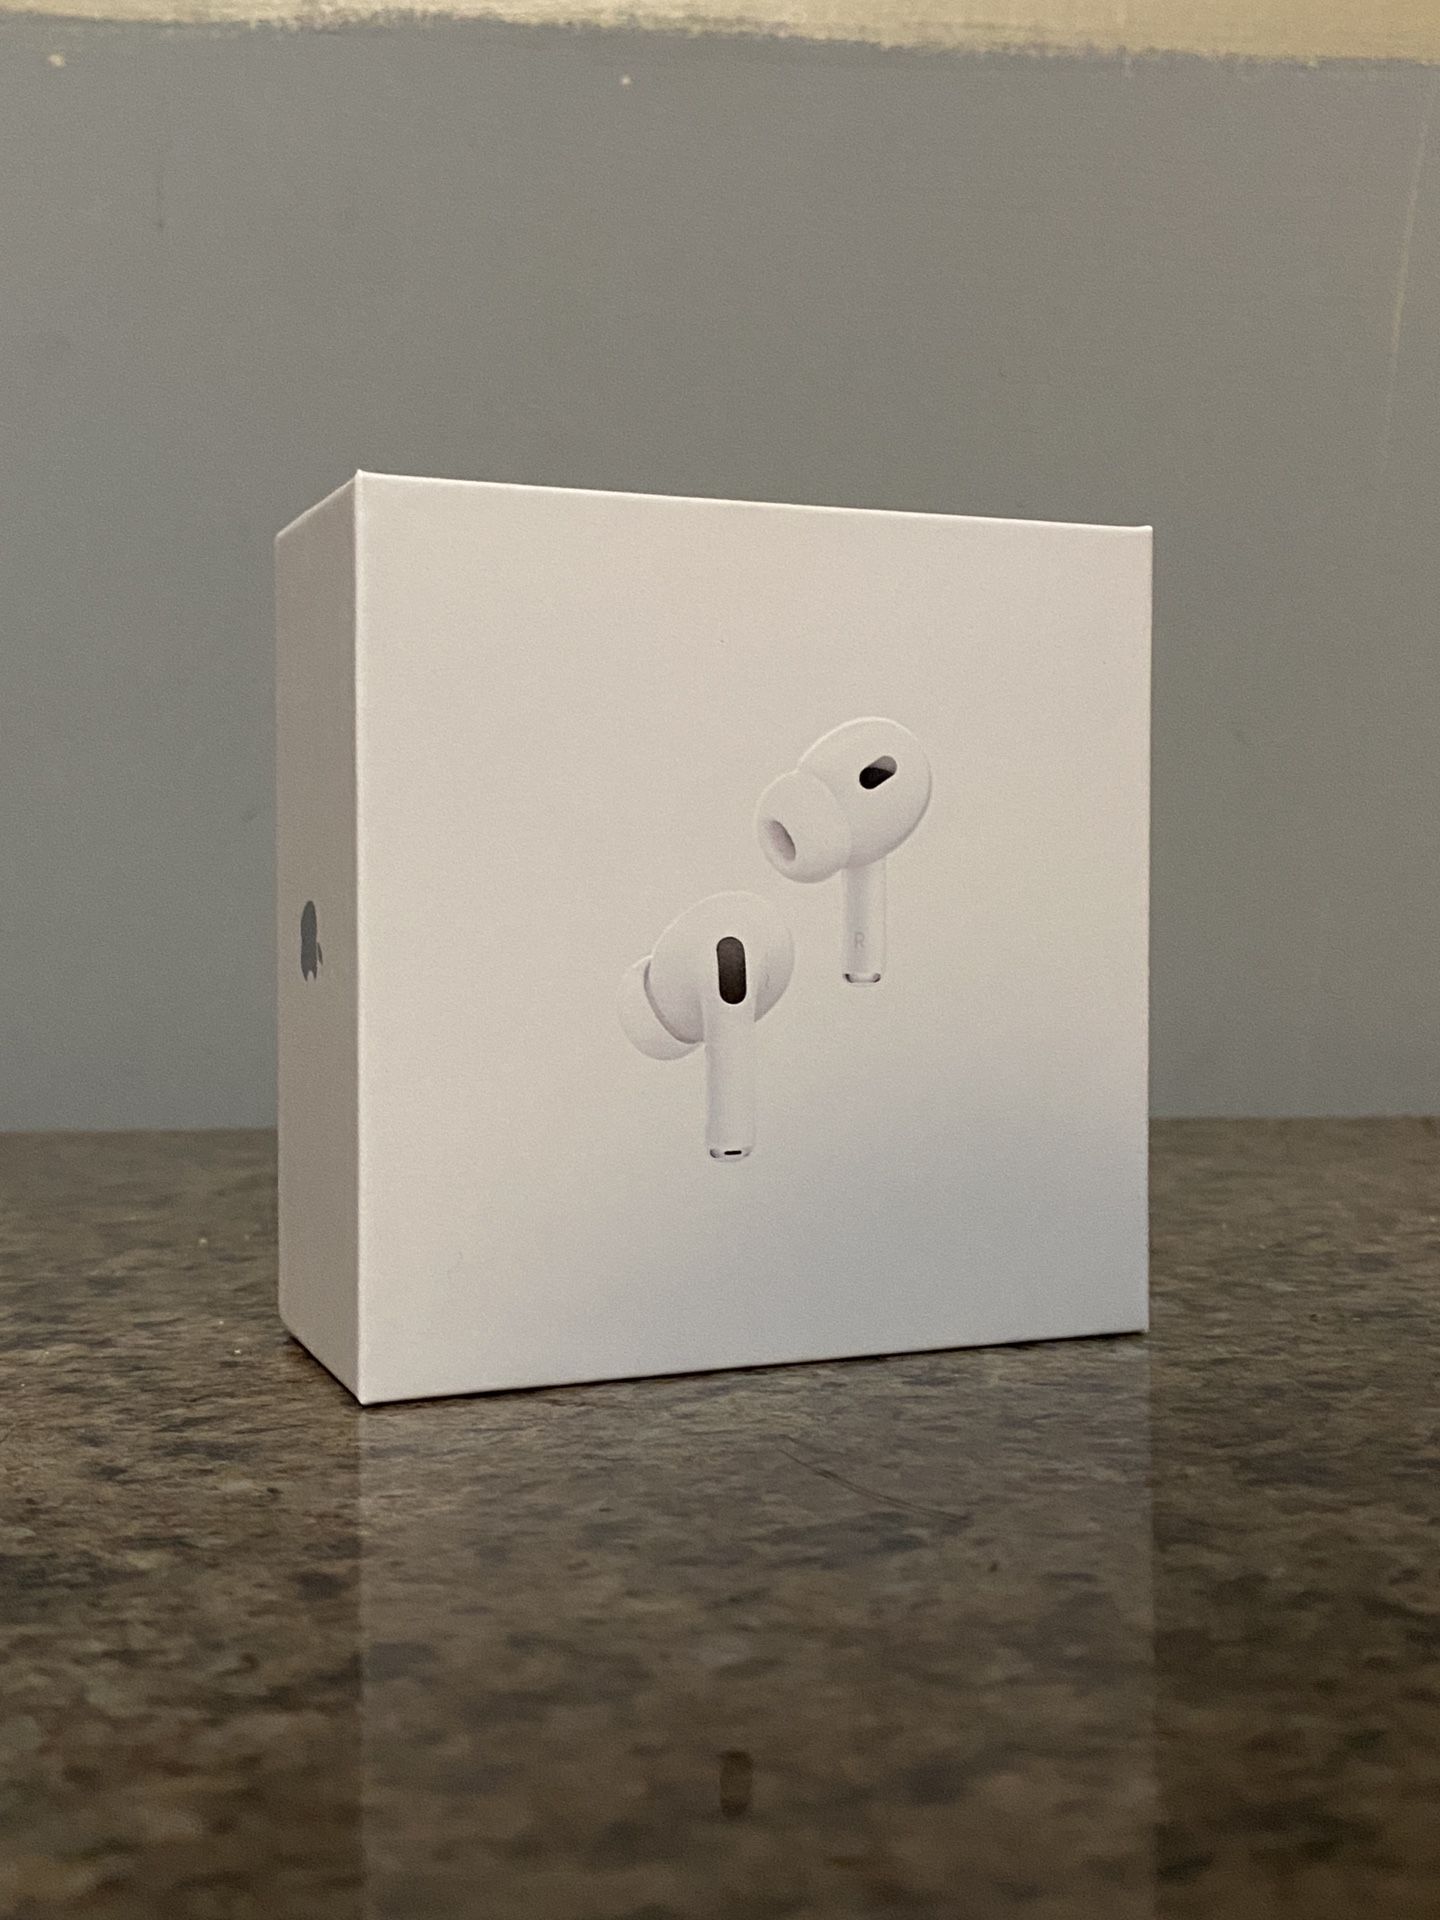 Gucci Ophidia Case For AirPods Pro for Sale in Bellevue, WA - OfferUp